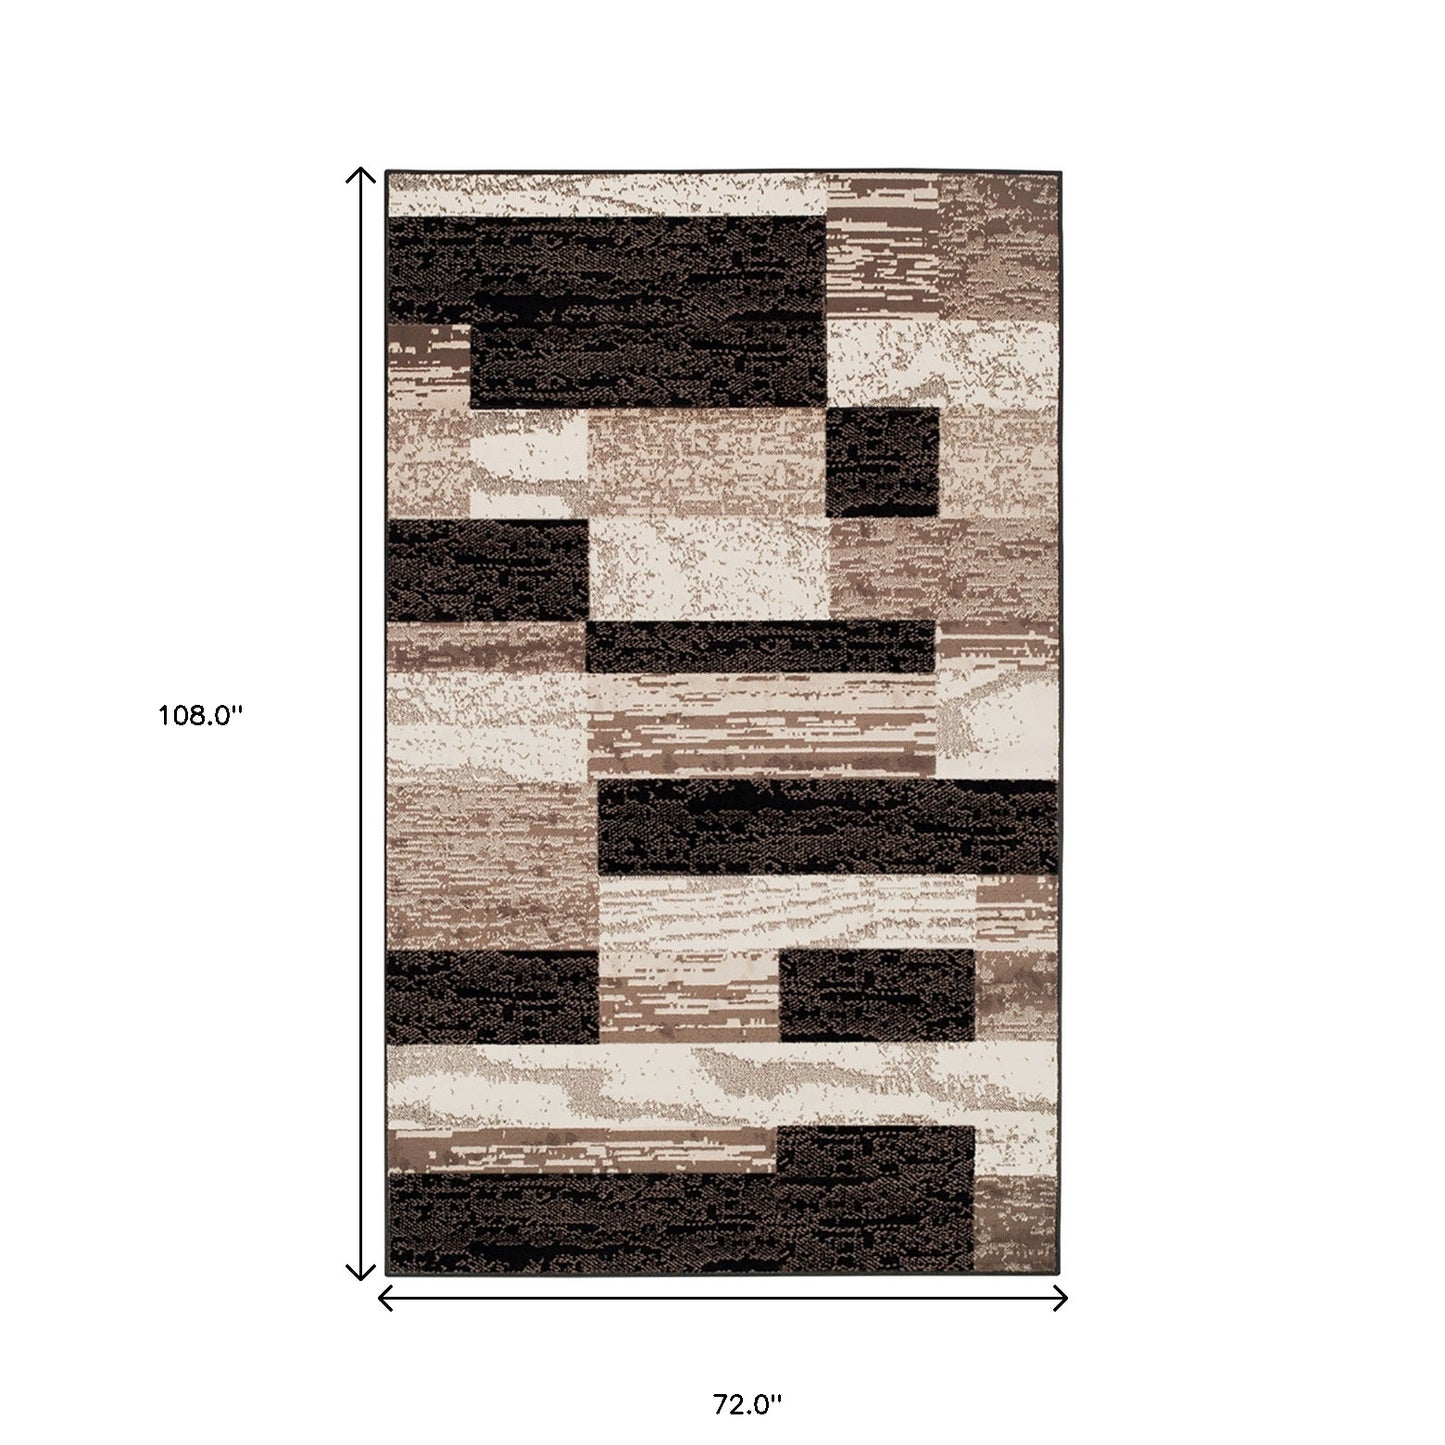 6' X 9' Chocolate Patchwork Power Loom Stain Resistant Area Rug